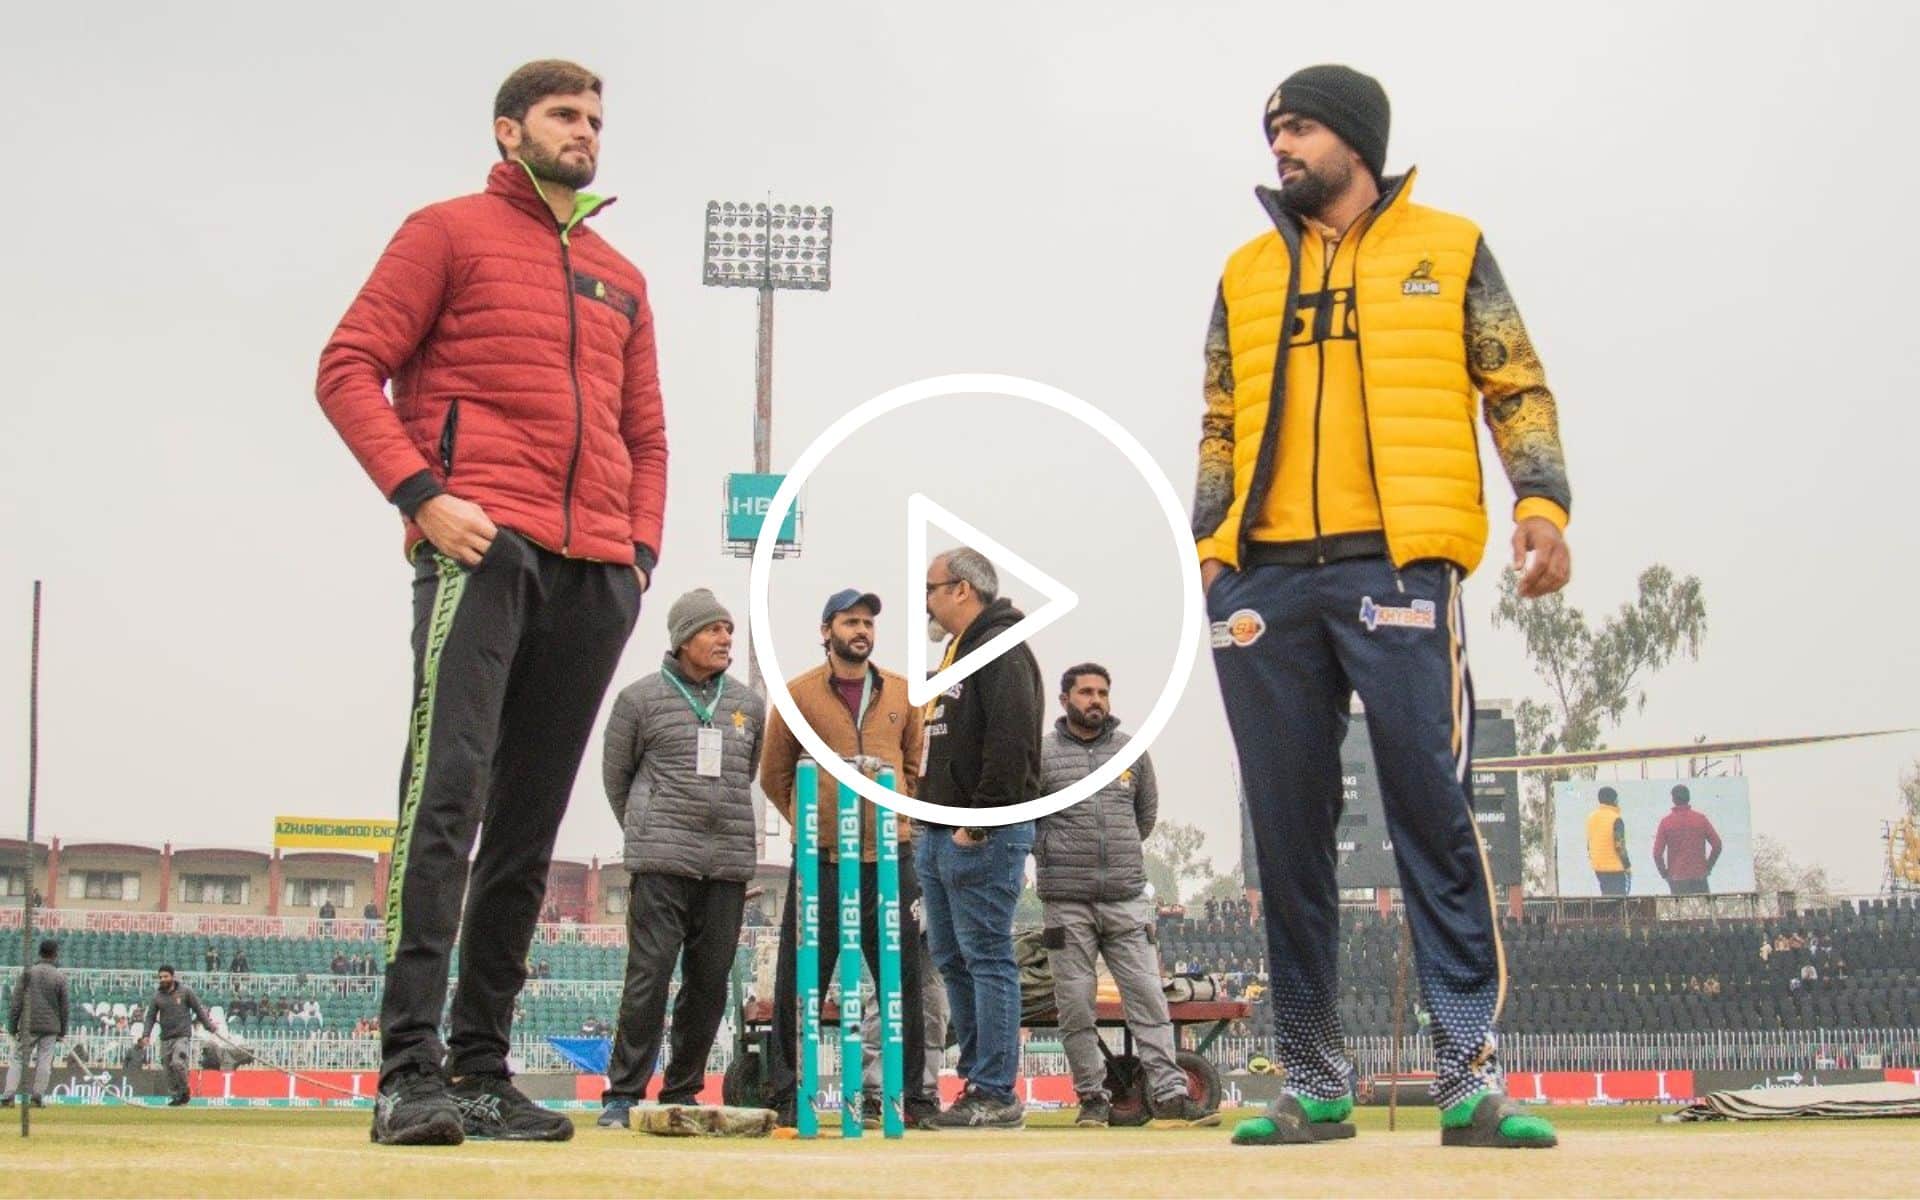 [Watch] Lahore-Peshawar, Islamabad-Quetta PSL Games Called Off After Relentless Rain